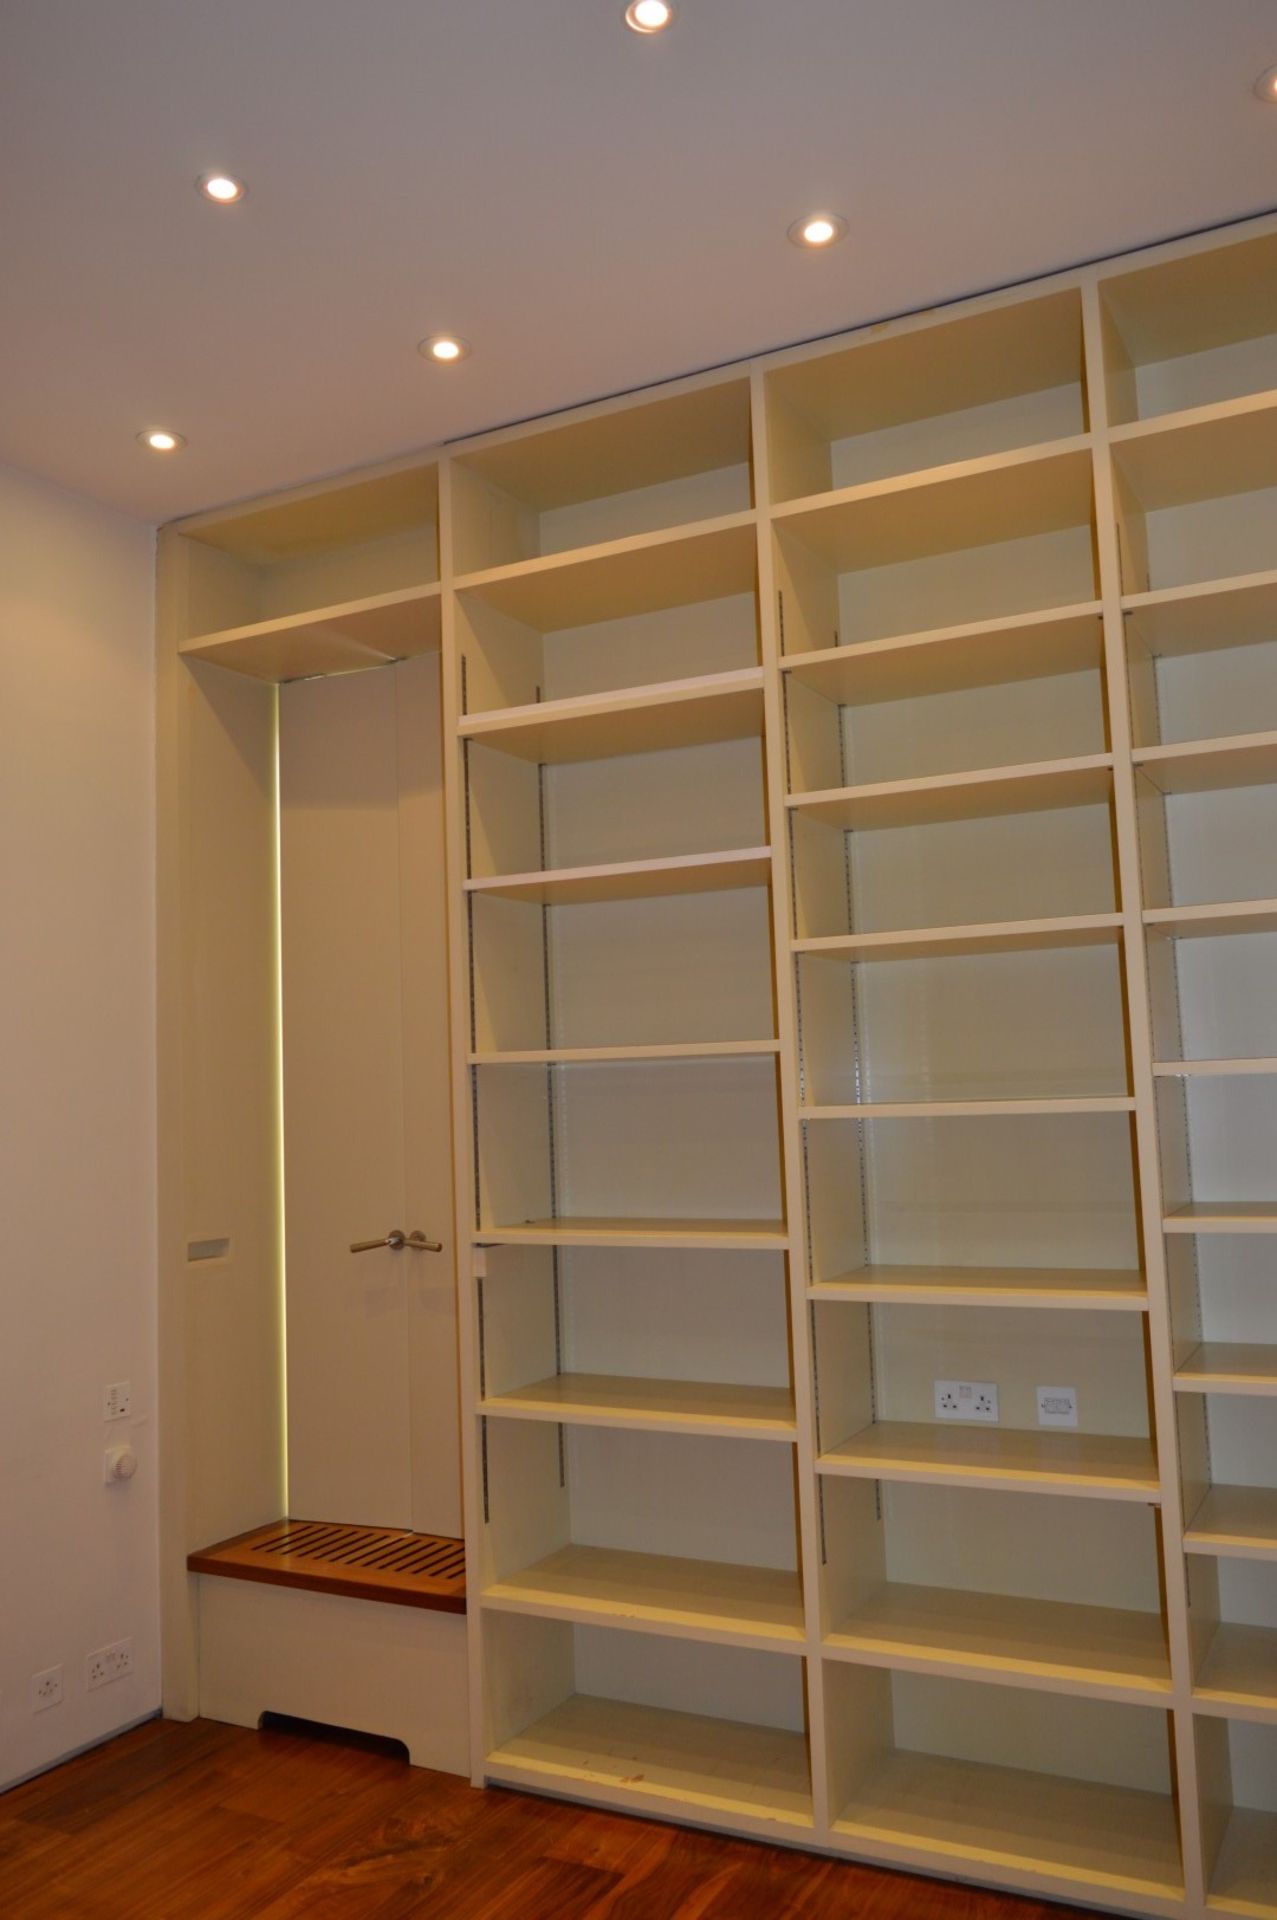 1 x Office Storage Room Including Two Sections of Adjustable Storage Shelvings and Oak Sideboard - Image 3 of 18